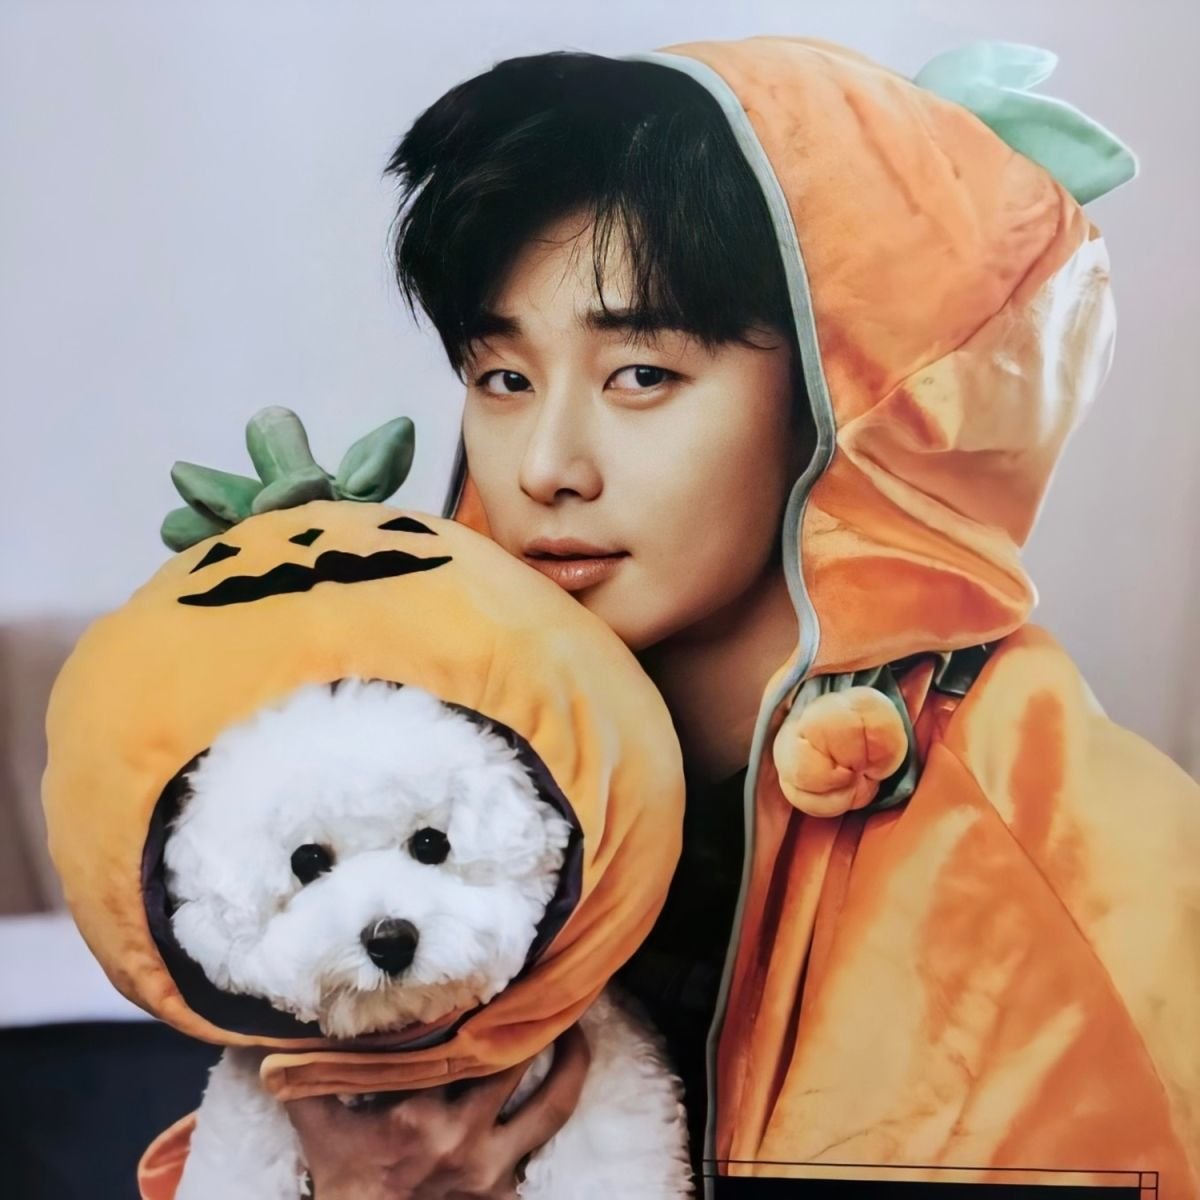 Park Seo Joon lives alone with his pet 0